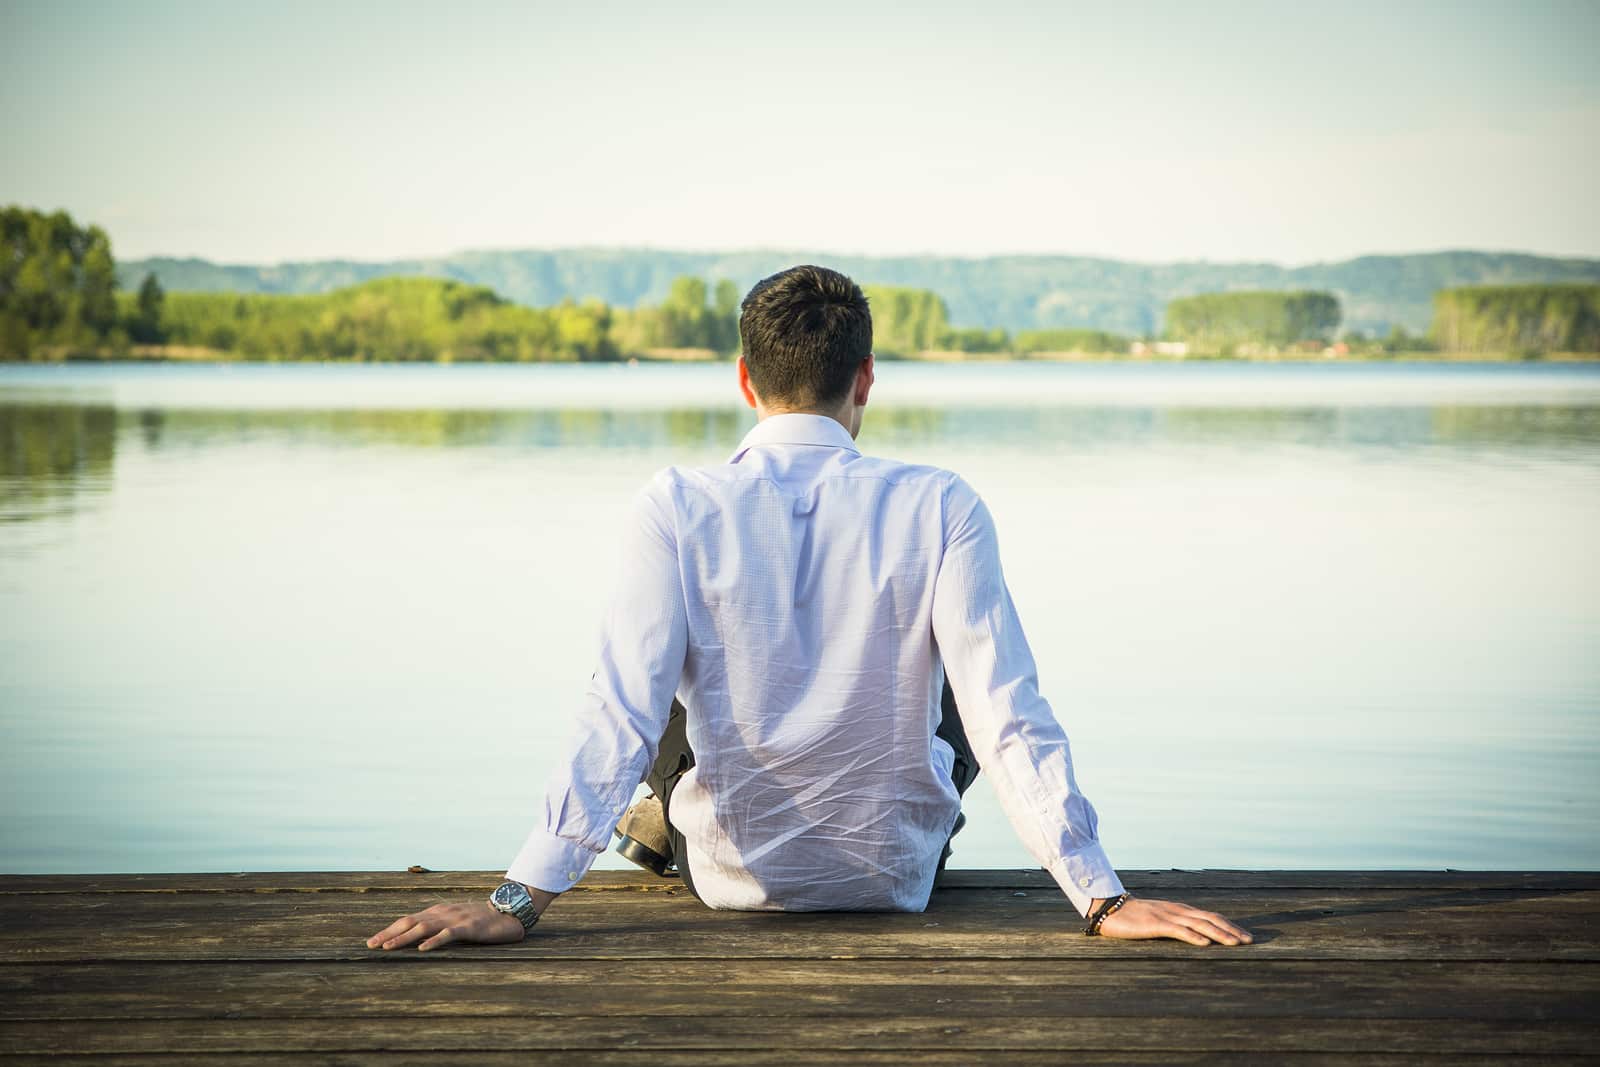 Handsome young man on a lake in a sunny, peaceful day, sitting on a wood pier, thinking or meditating